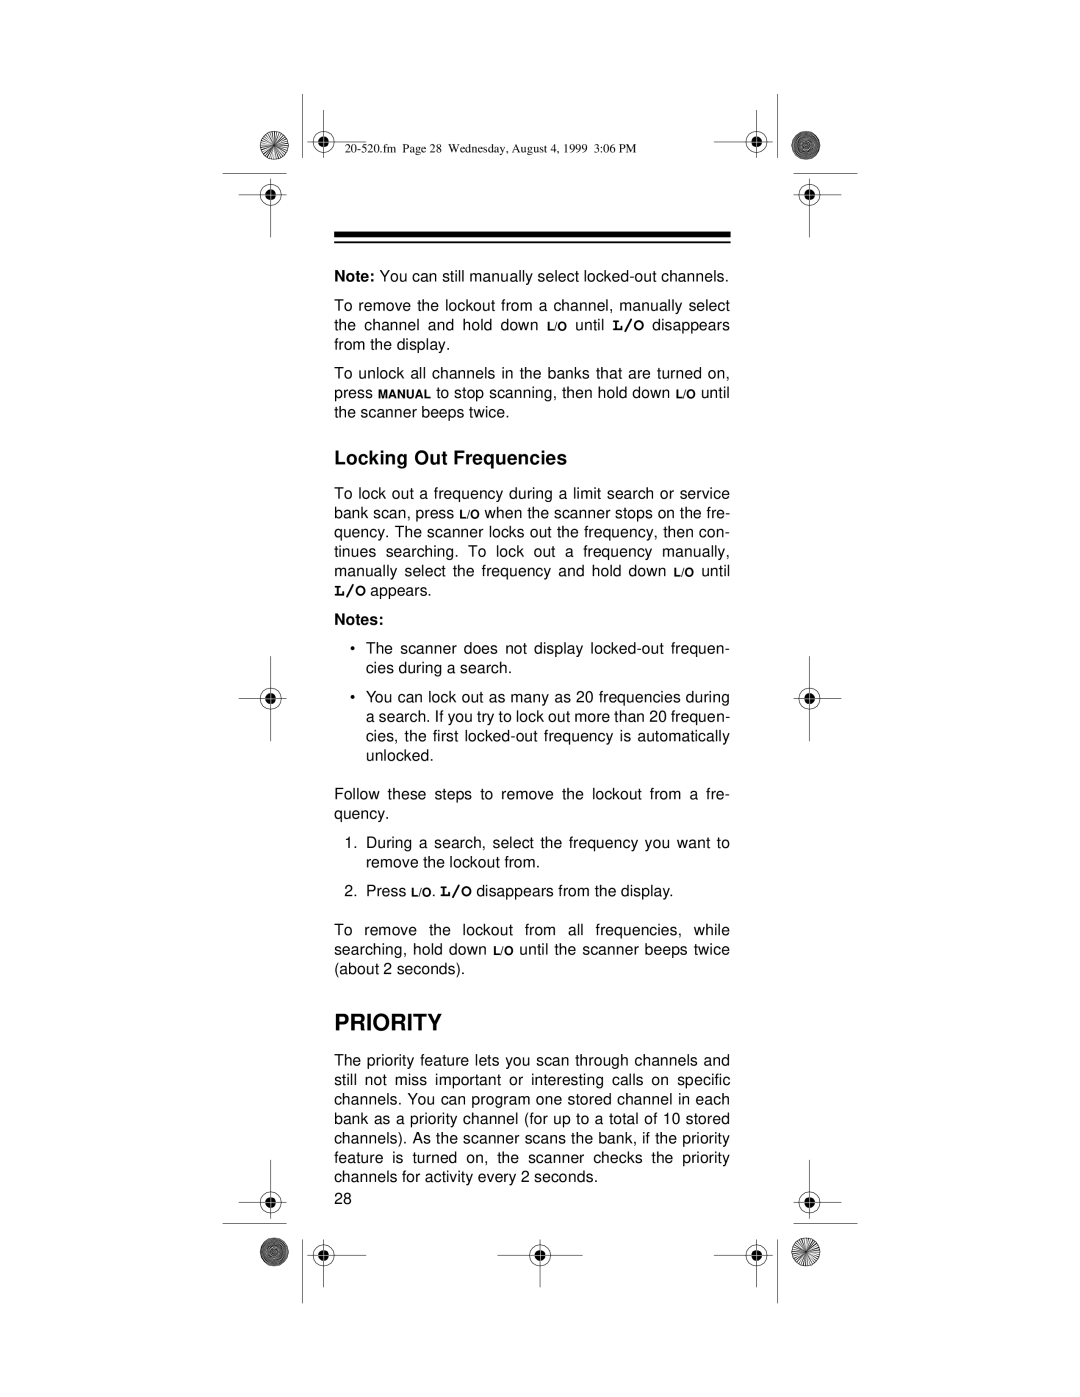 Radio Shack PRO-90 owner manual Priority, Locking Out Frequencies 